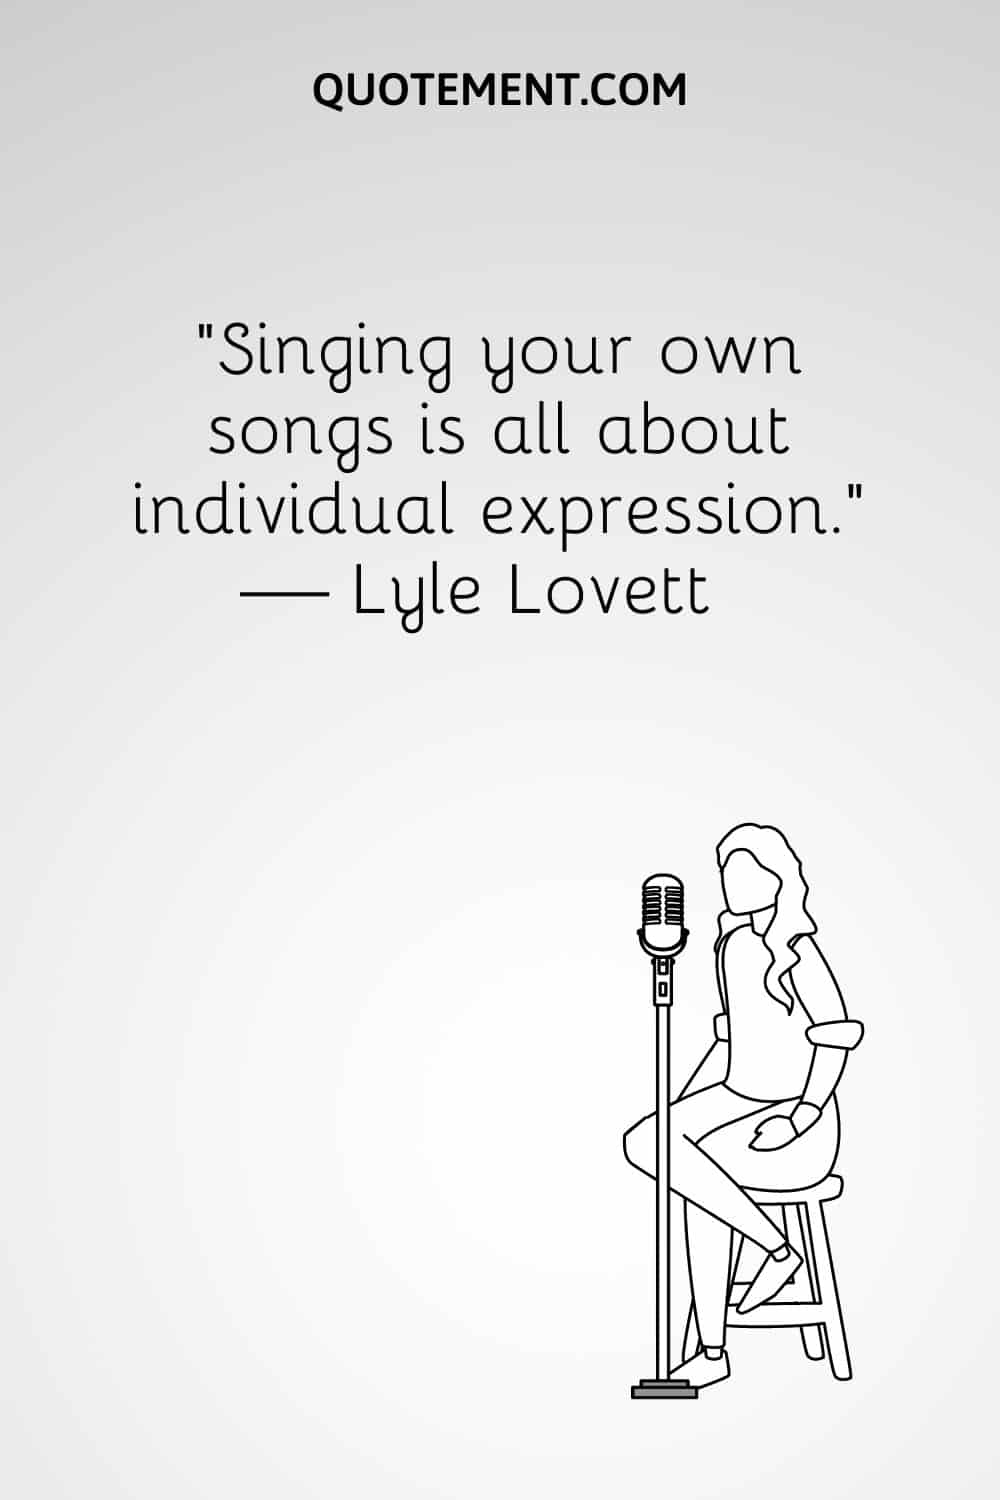 Singing your own songs is all about individual expression. — Lyle Lovett